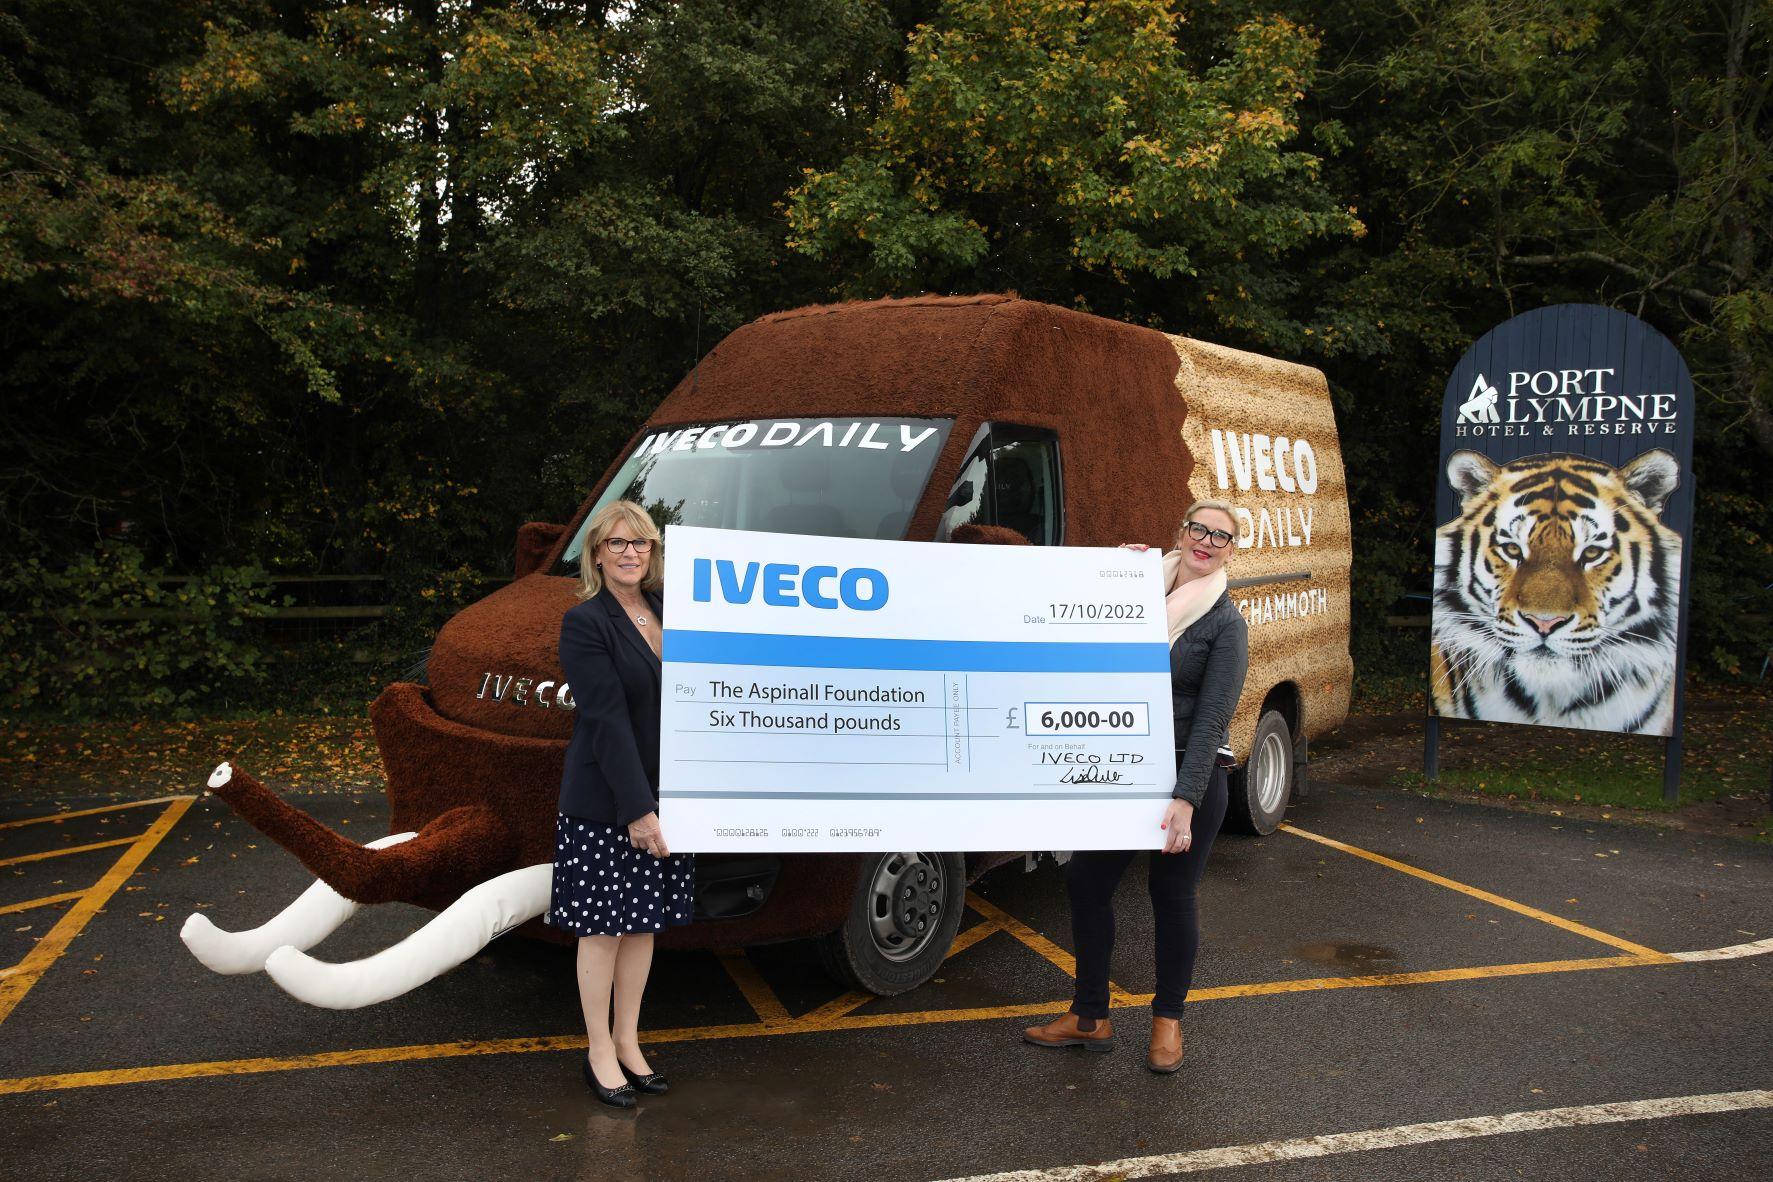 Unique IVECO Daily Chammoth Raises £6,000 for endangered species